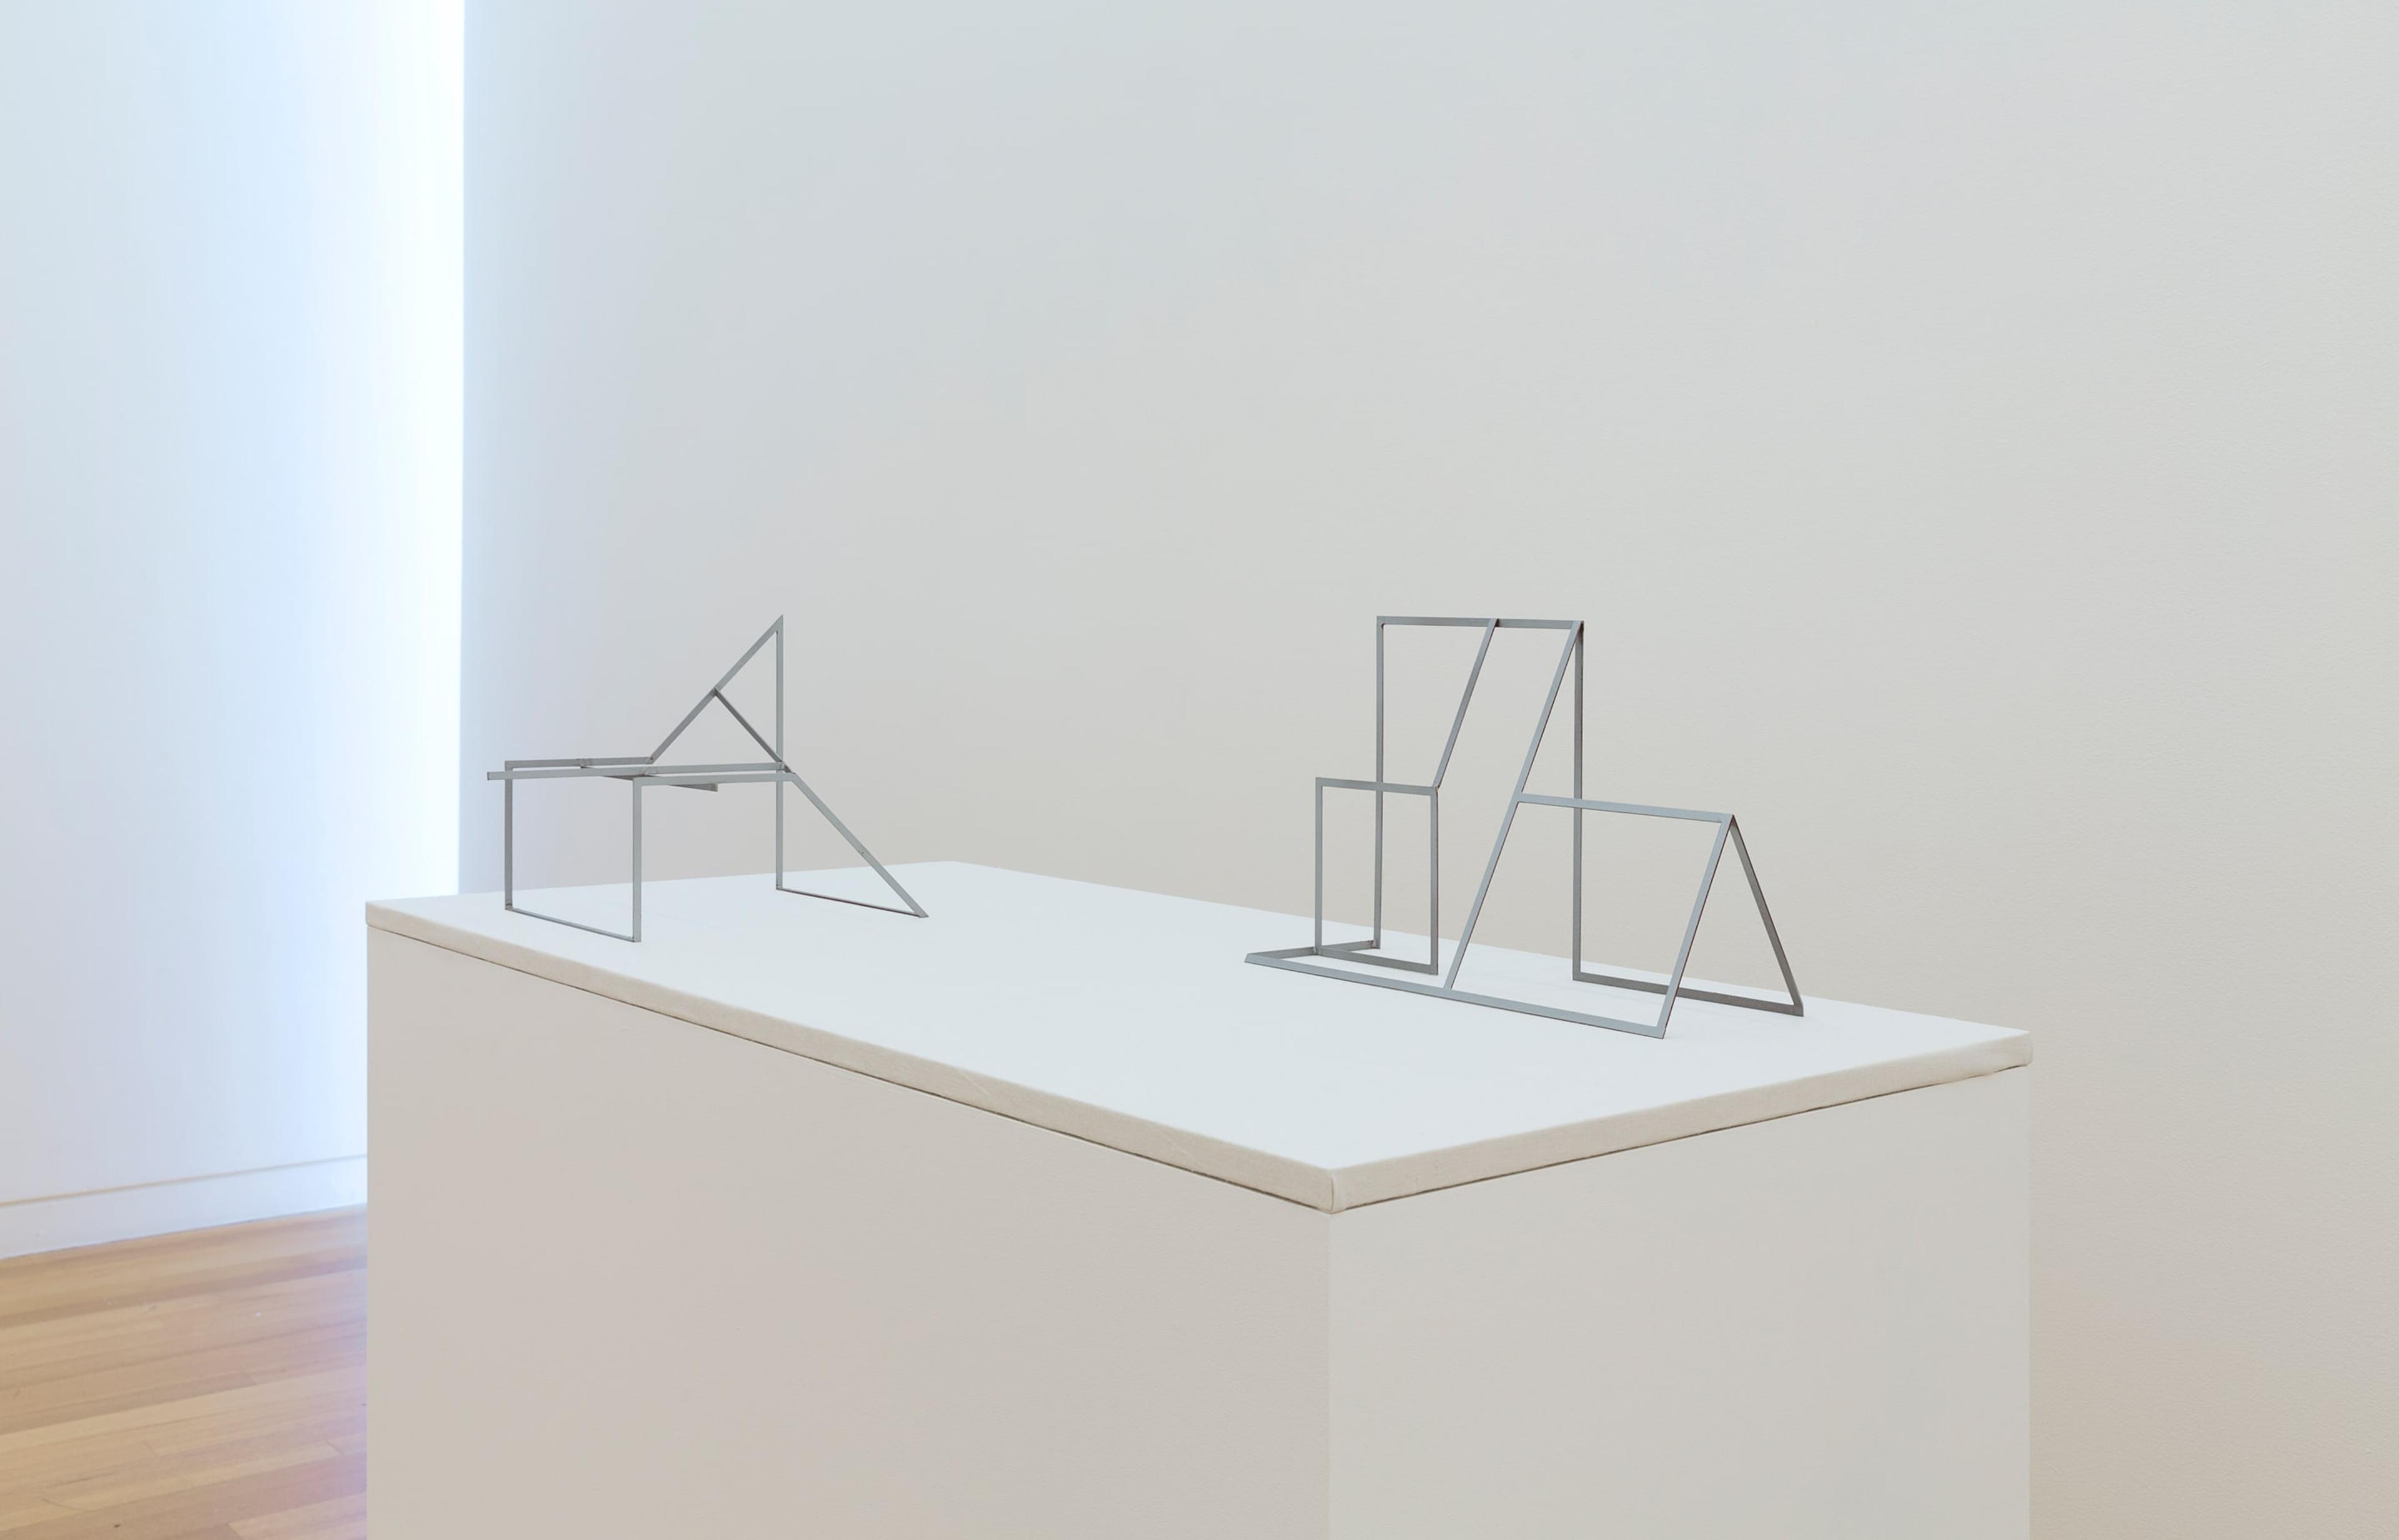 Installation view of John Panting: Spatial Constructions at the Adam Art Gallery, showing Untitled, circa 1972, mild steel and aluminium paint. Collection of Museum of New Zealand Te Papa Tongarewa. Photo: Shaun Waugh.